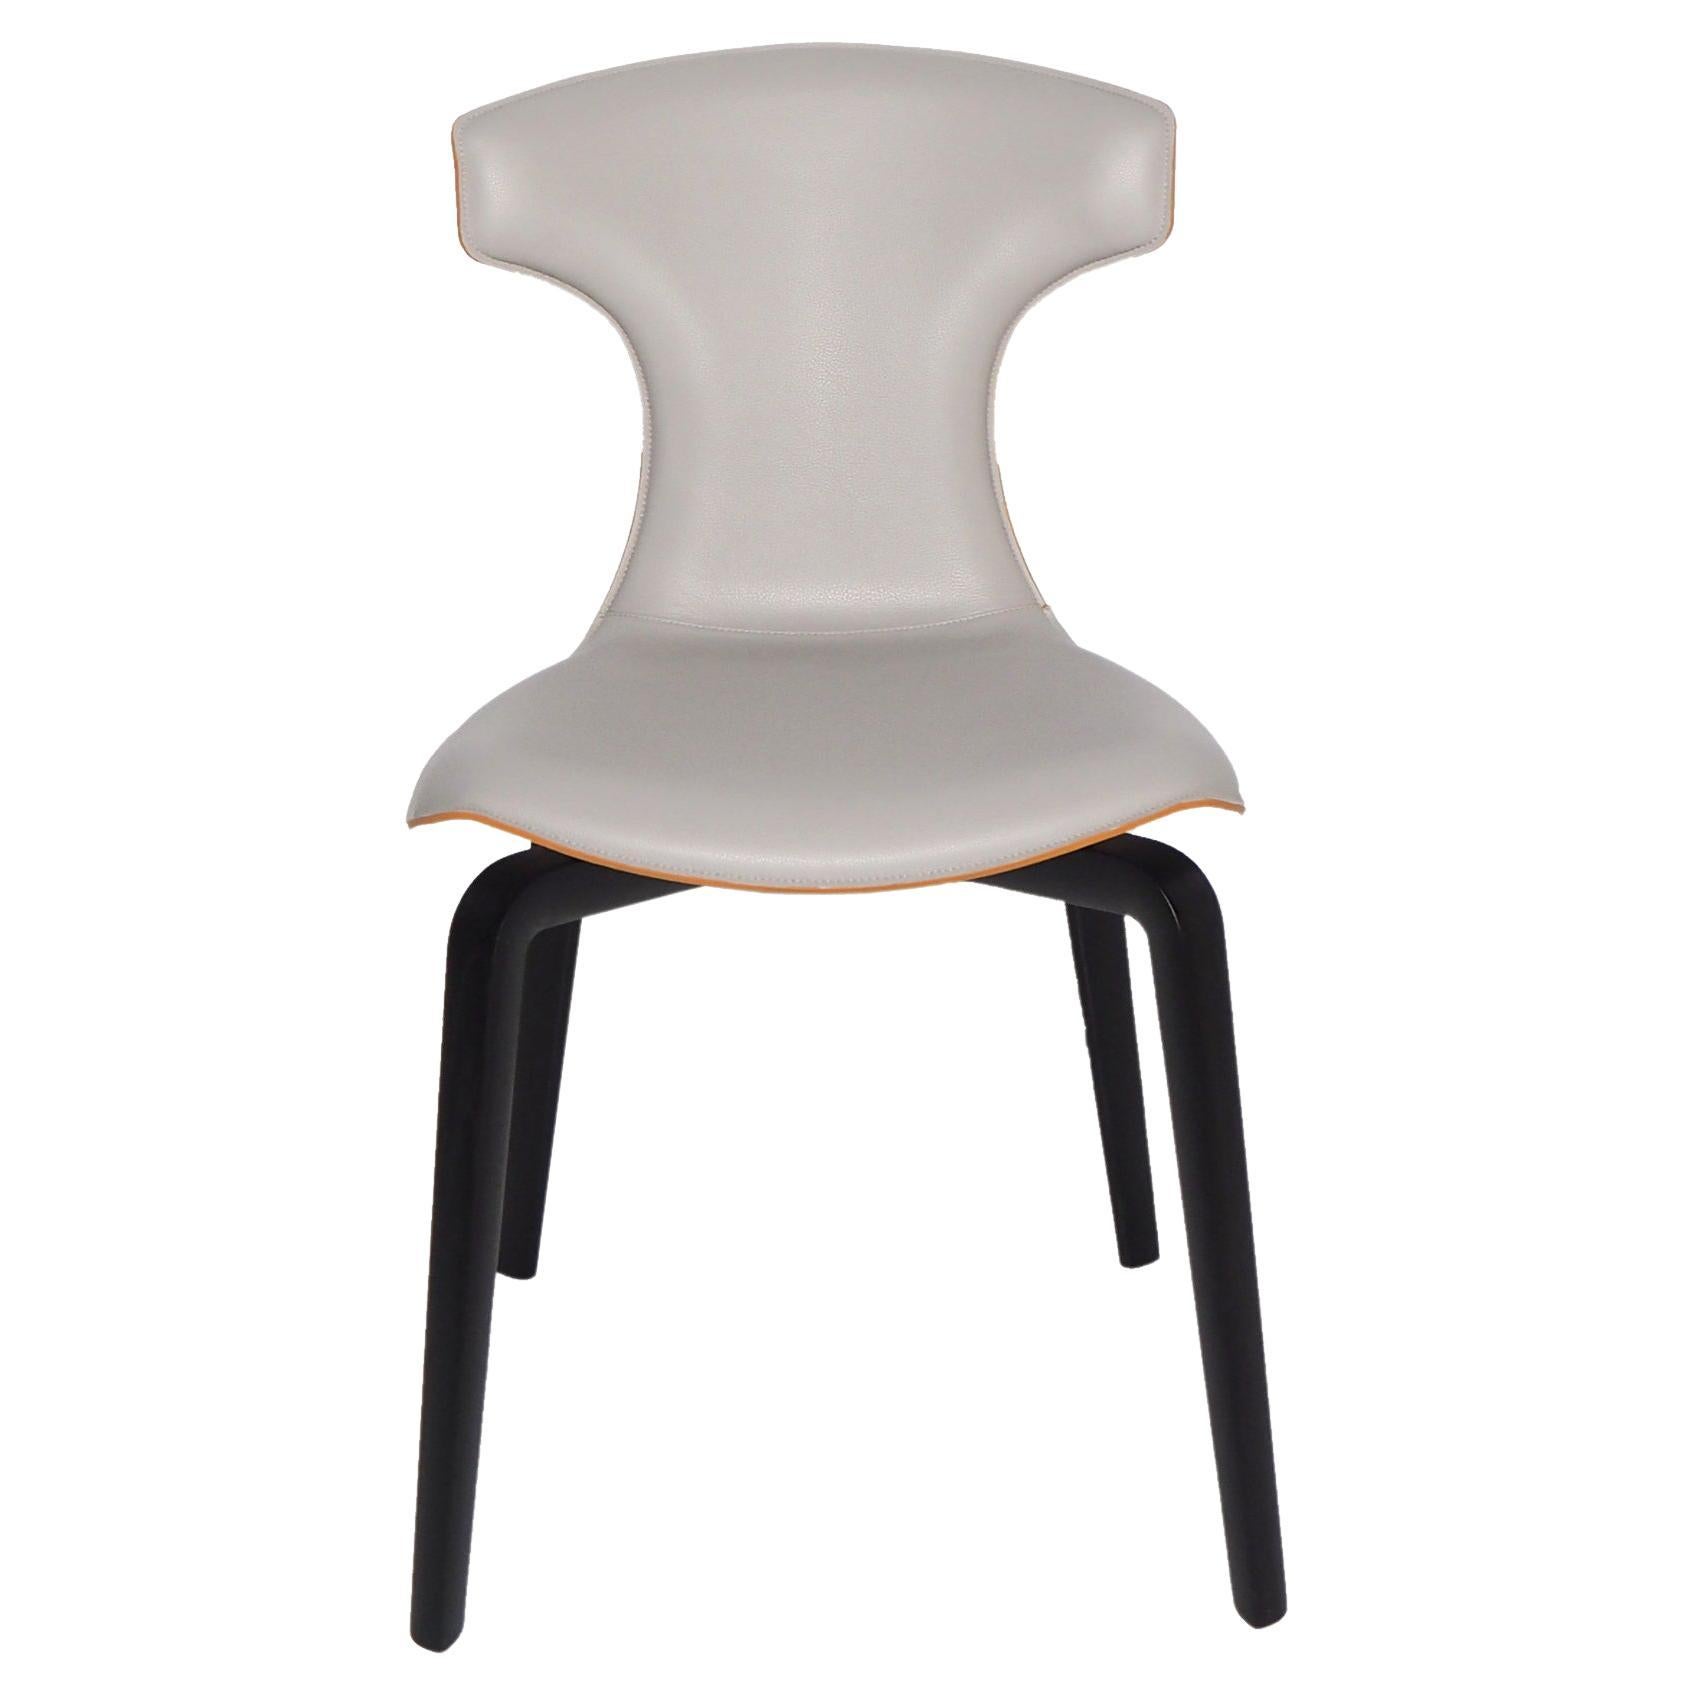 Montera Chair in Genuine Leather Pelle SC 23 Tortora and Saddle Extra Cammello For Sale